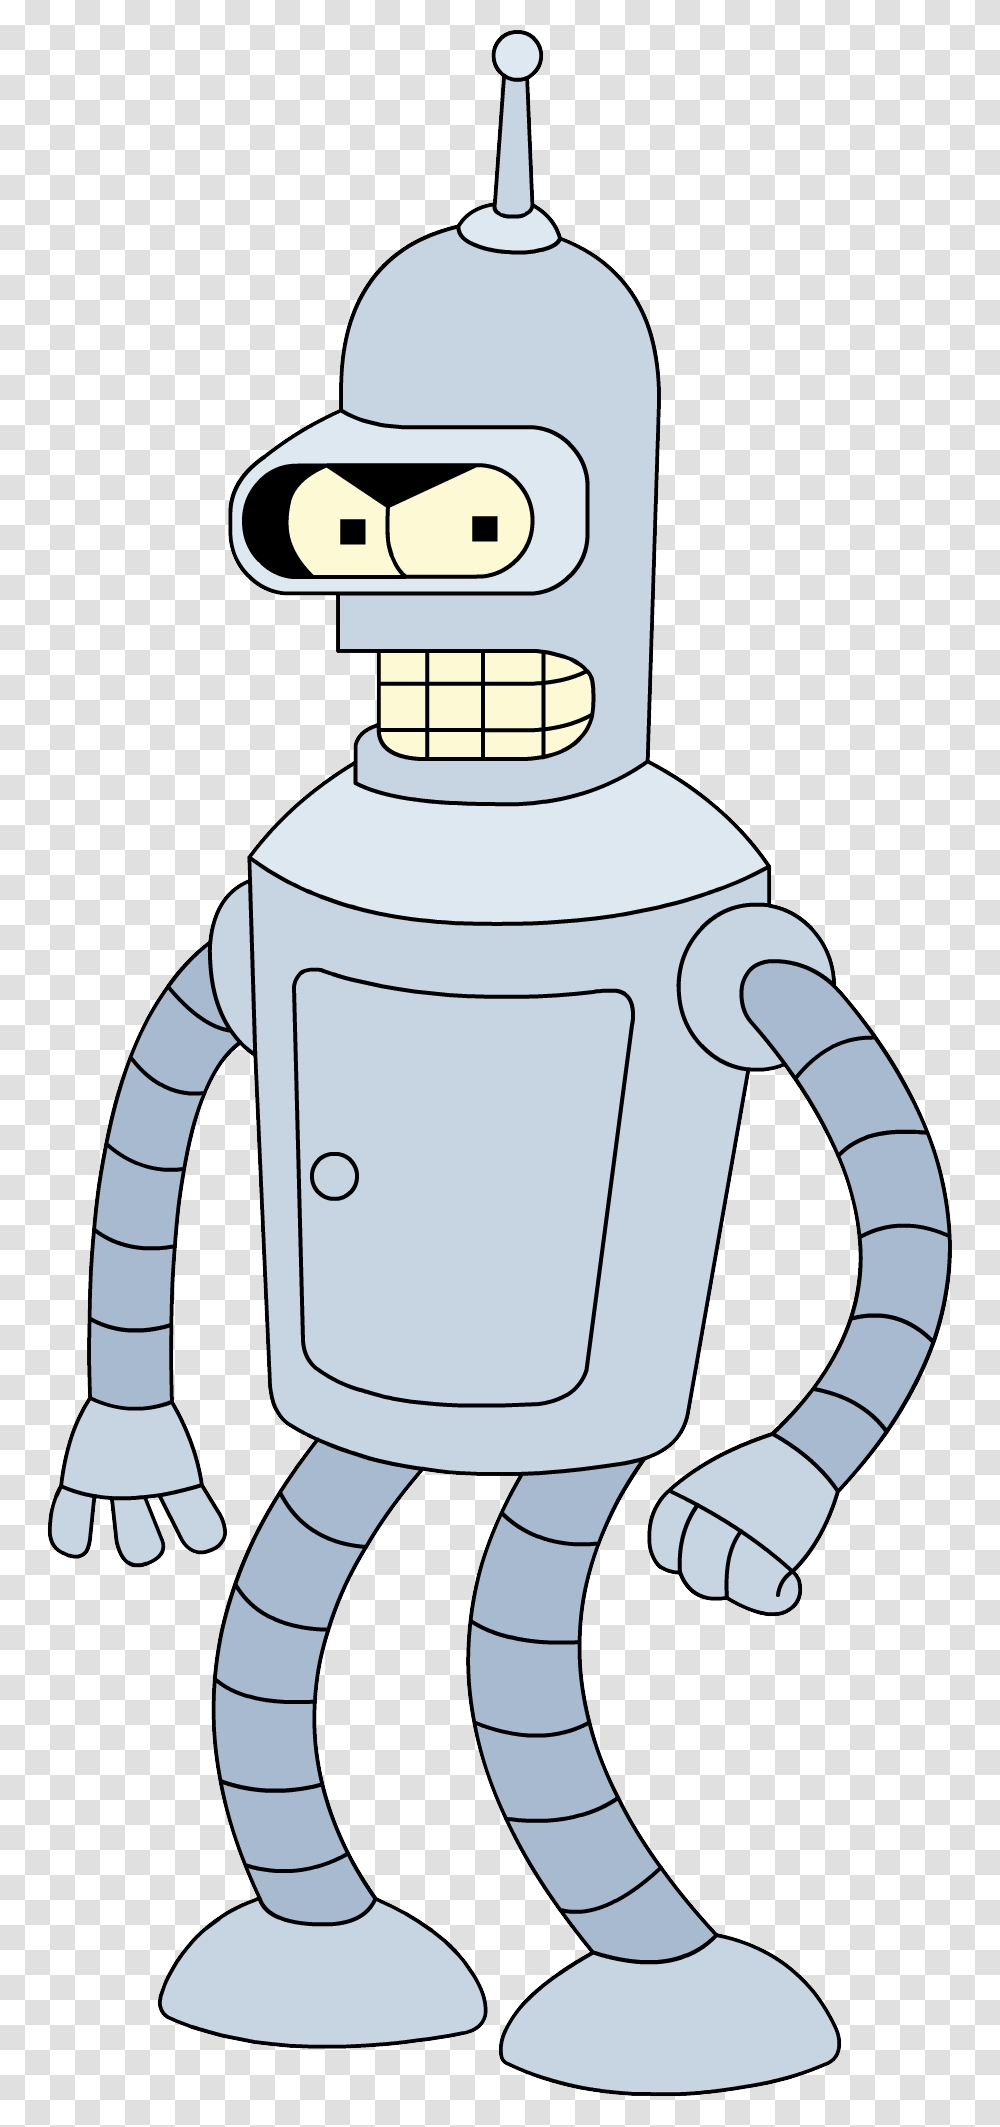 Futurama, Character, Pottery, Appliance, Fire Hydrant Transparent Png